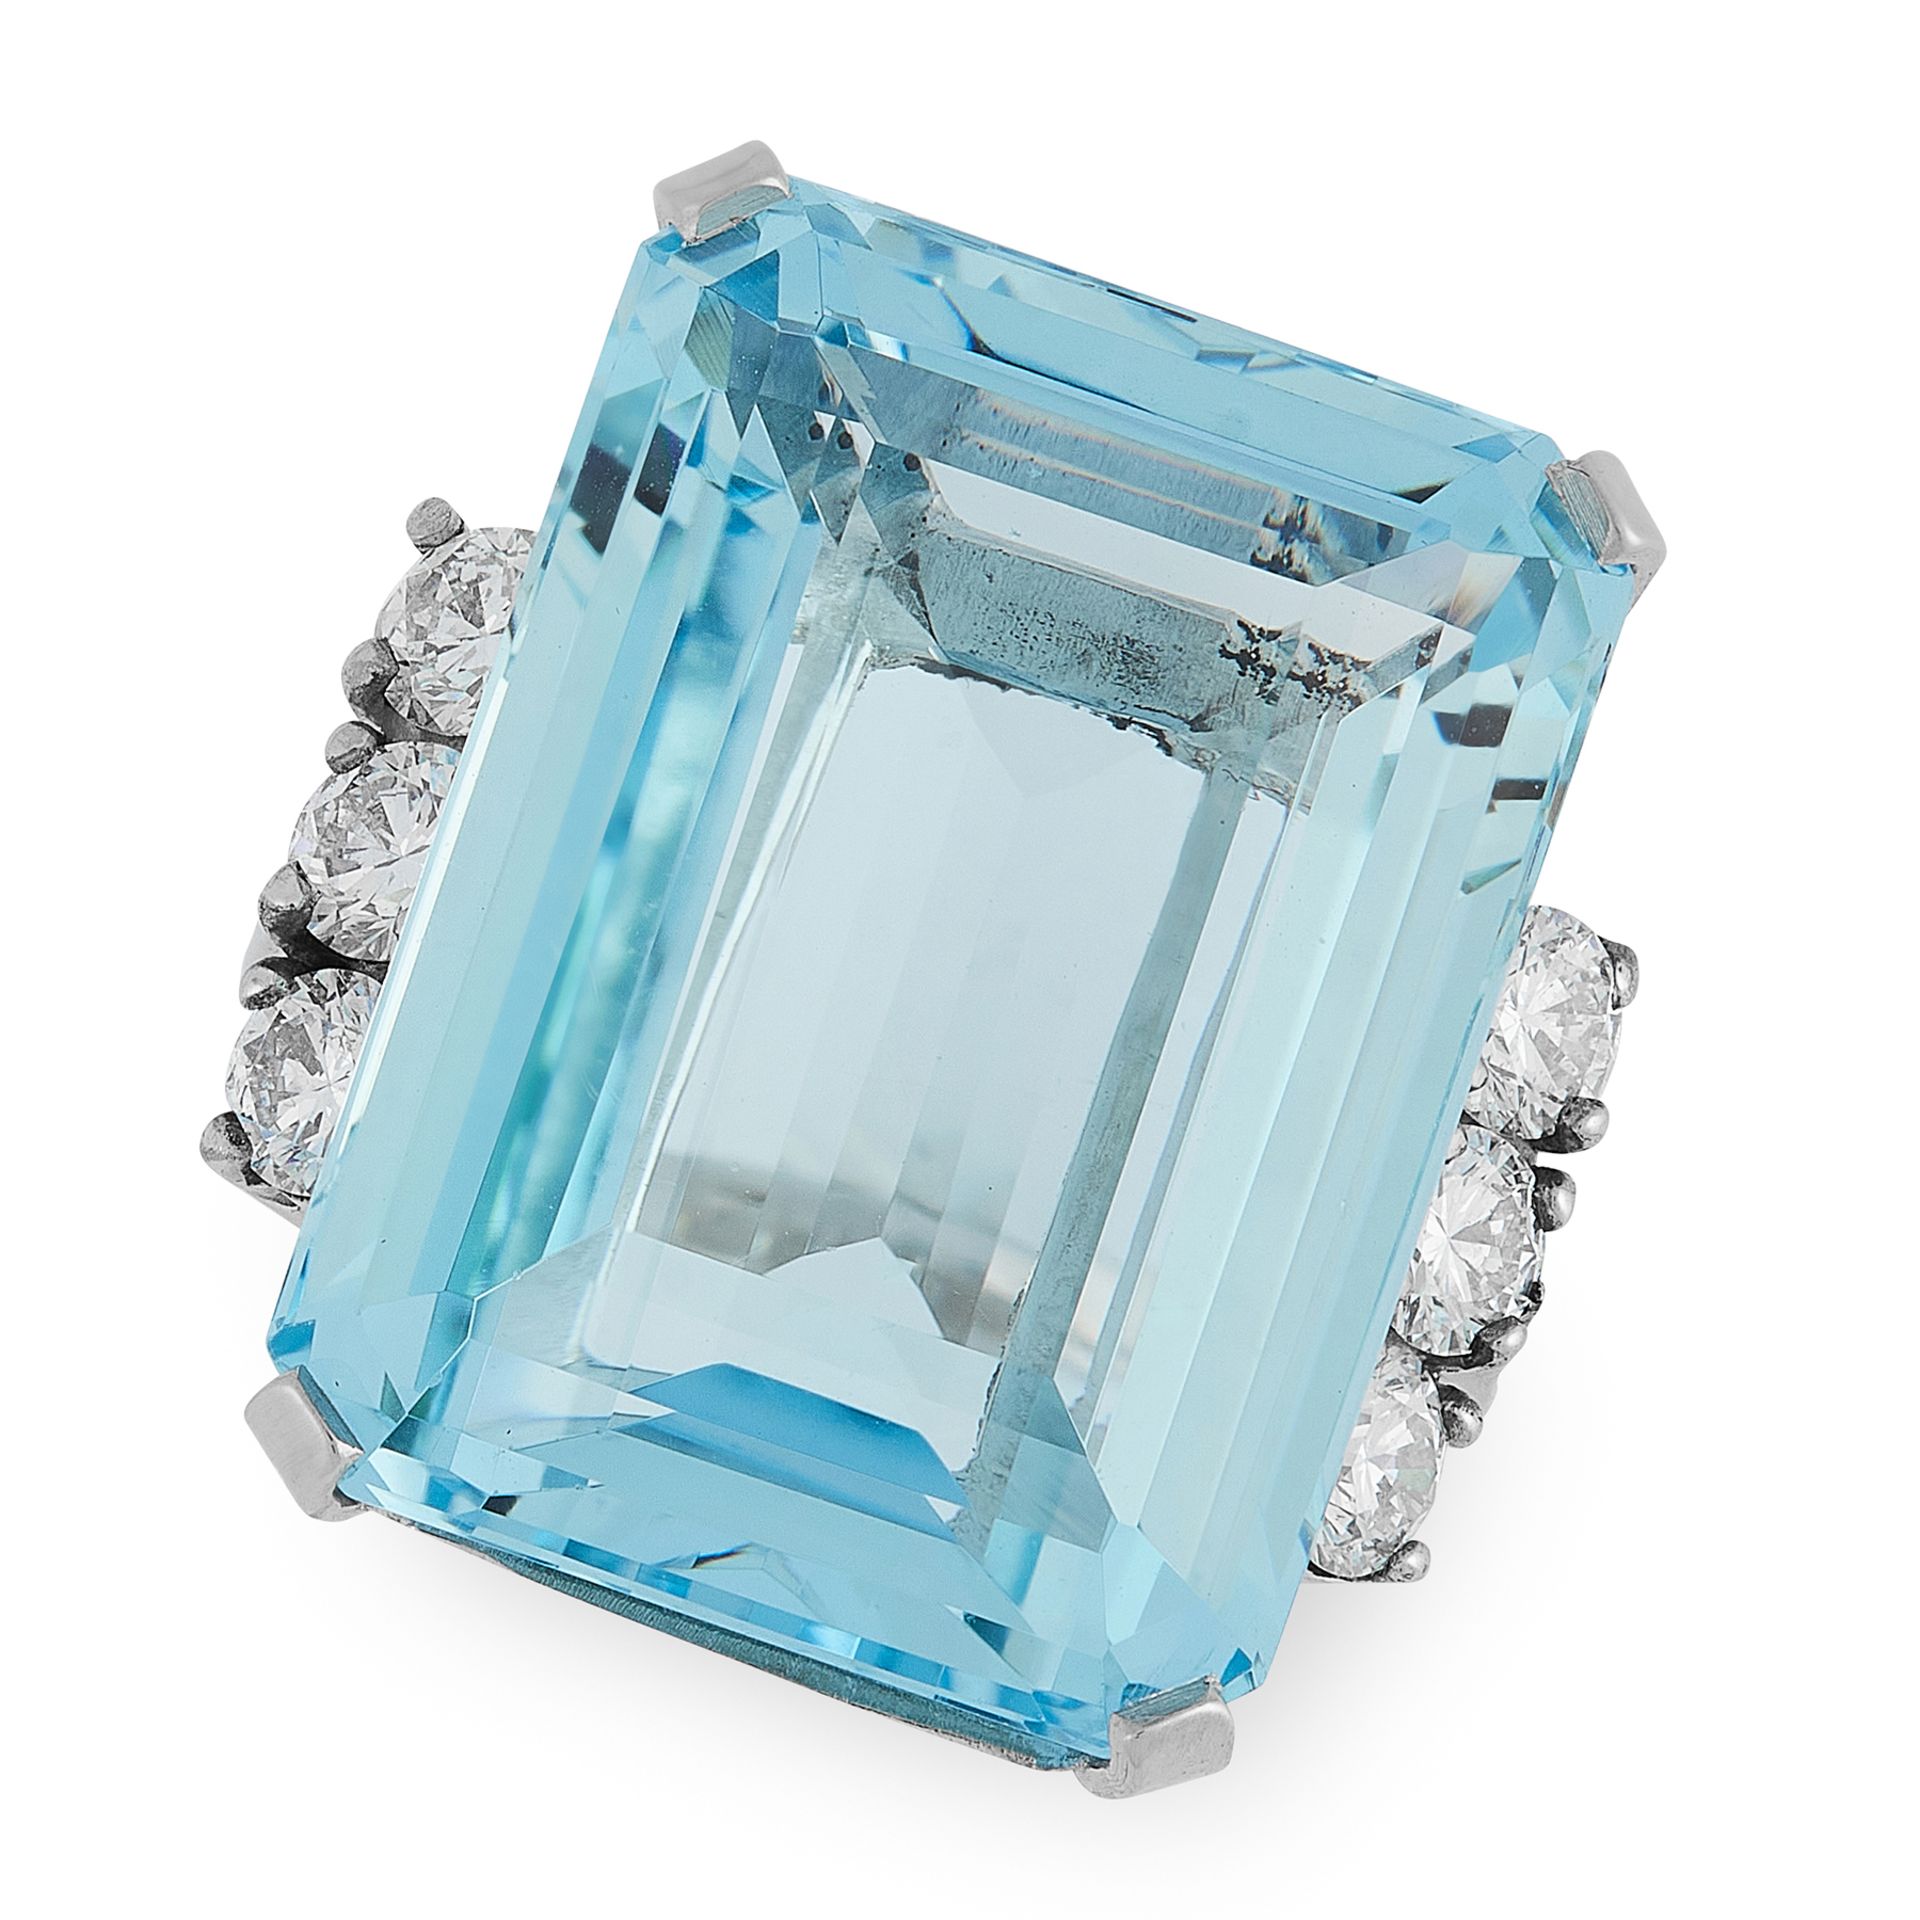 AN AQUAMARINE AND DIAMOND RING in 18ct white gold, set with an emerald cut aquamarine of 25.18